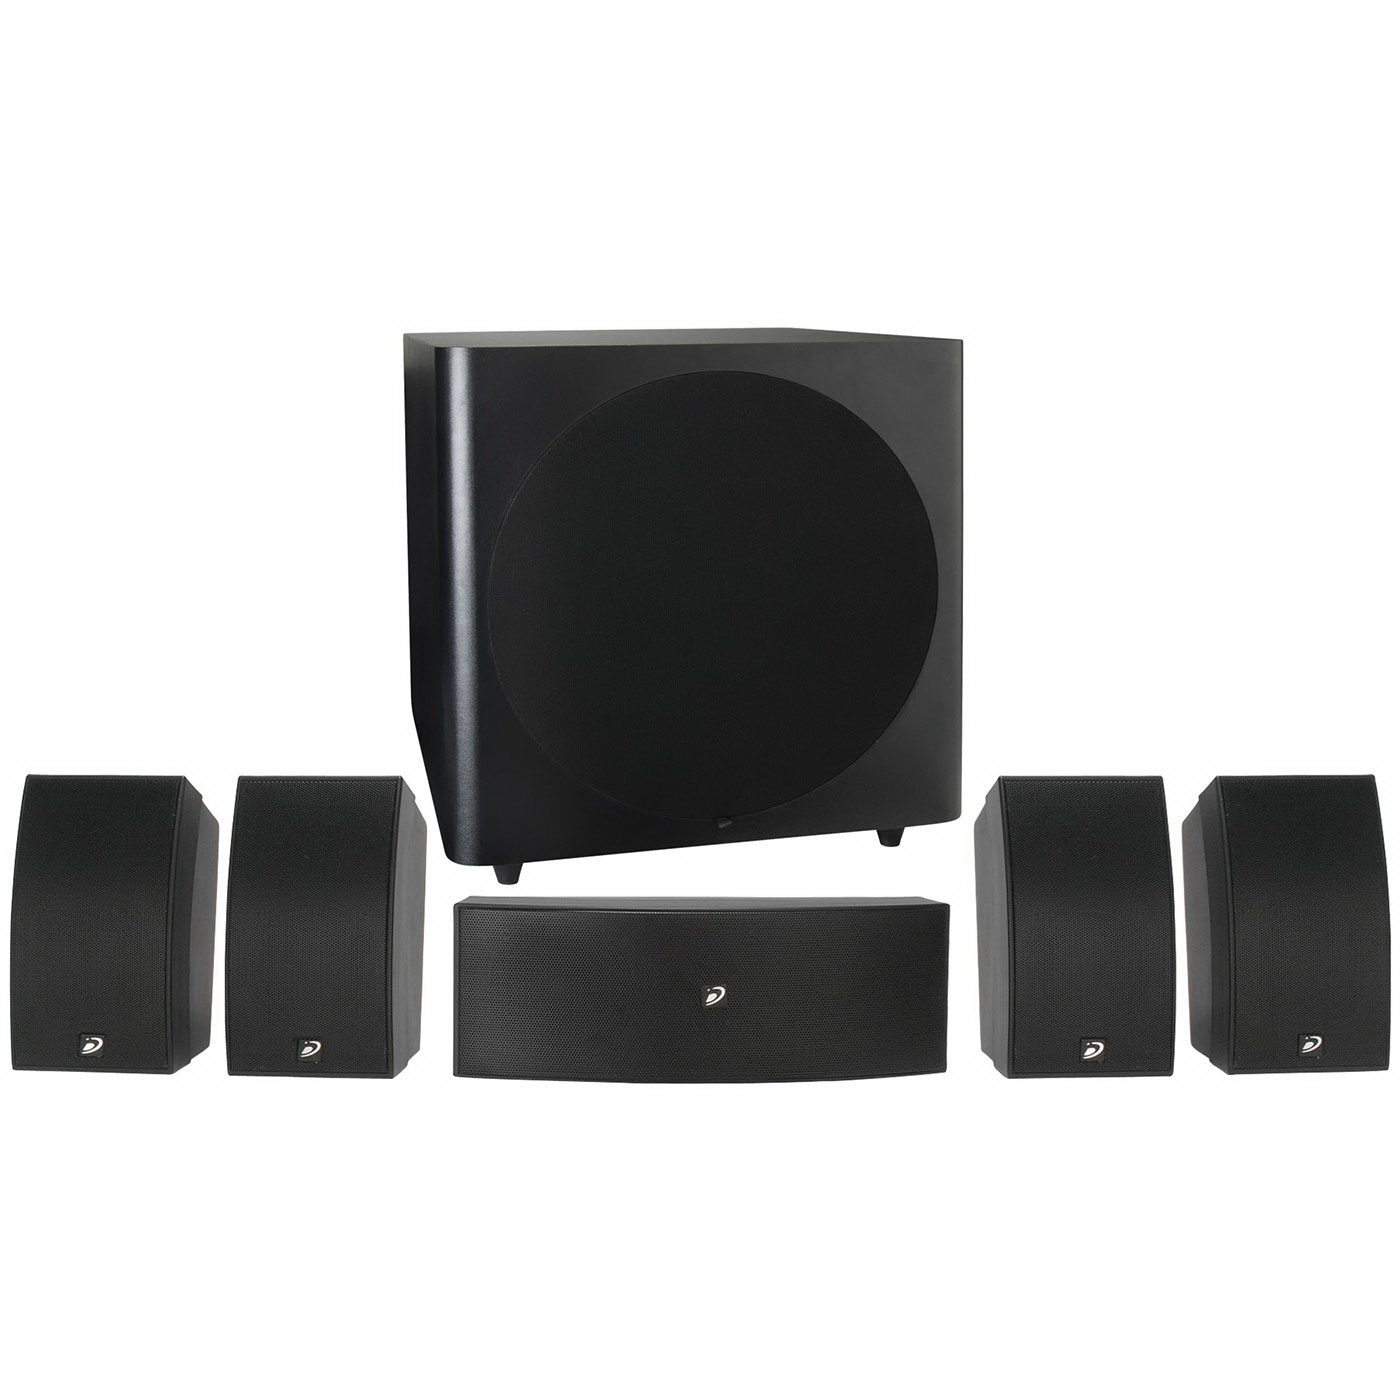 Dayton Audio PEX-300-696  HTP-1 5.1 Home Theater Package 8" Powered Subwoofer